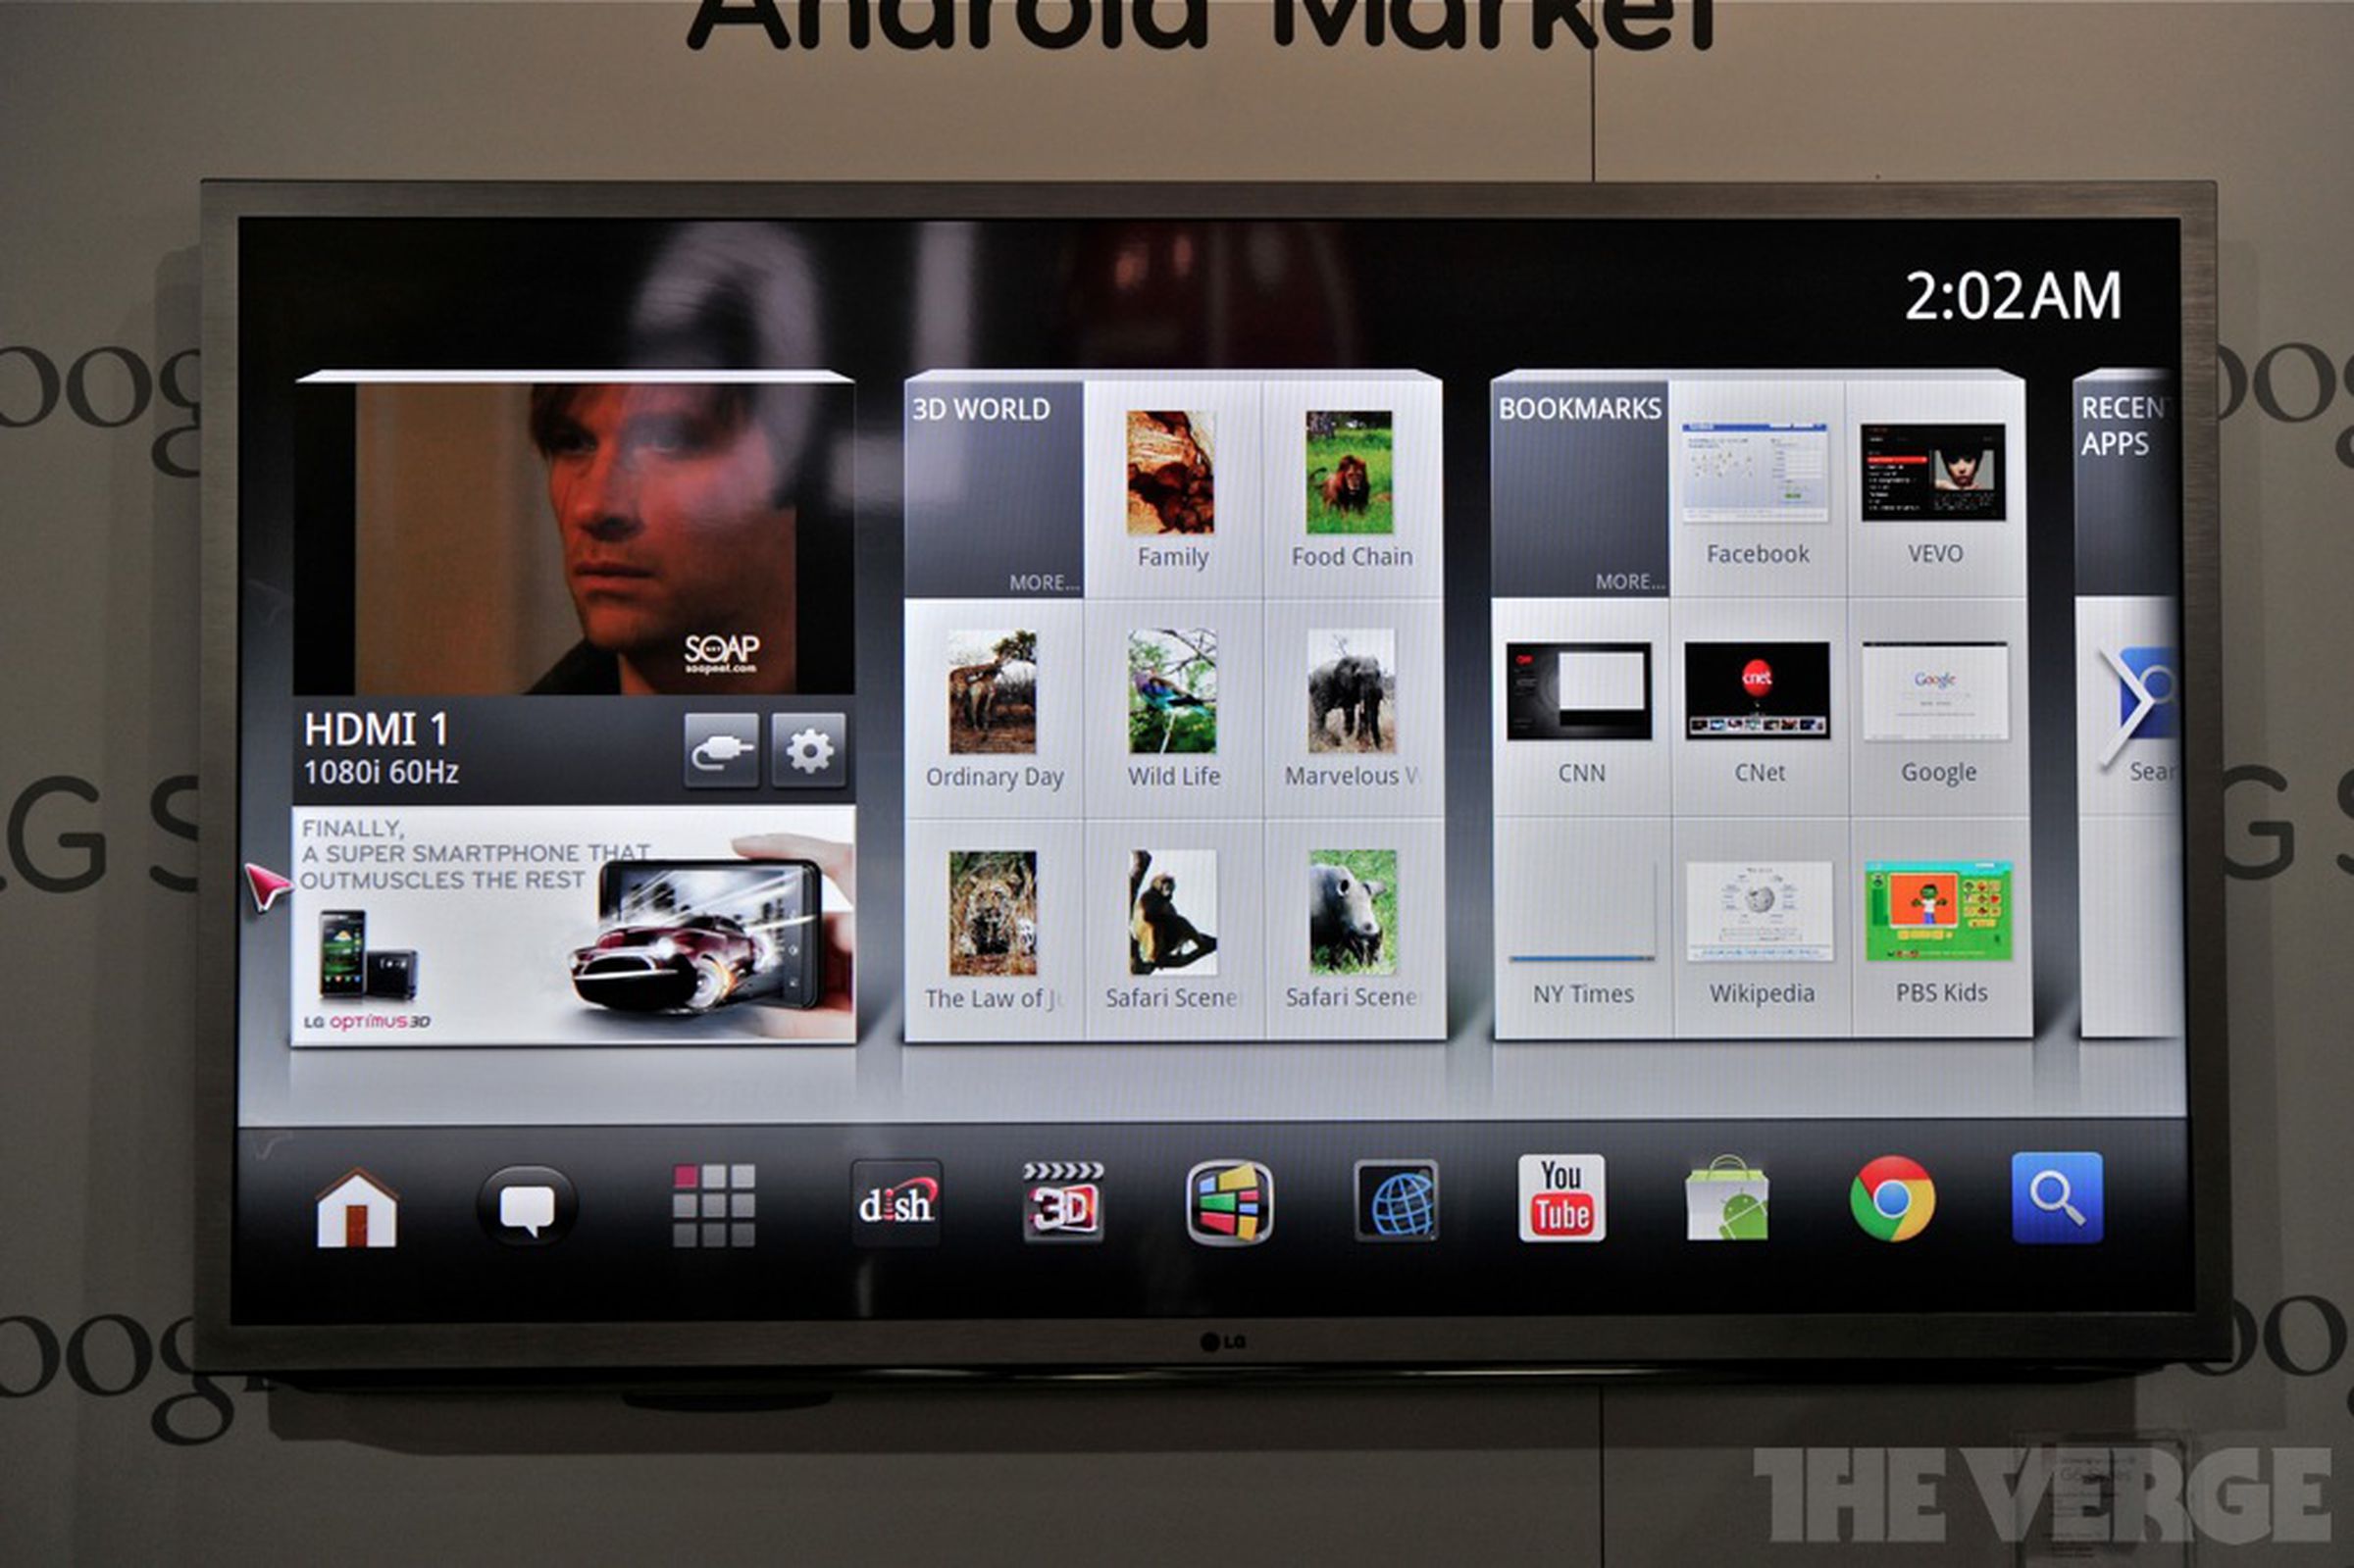 LG Smart TV with Google TV hands-on photos